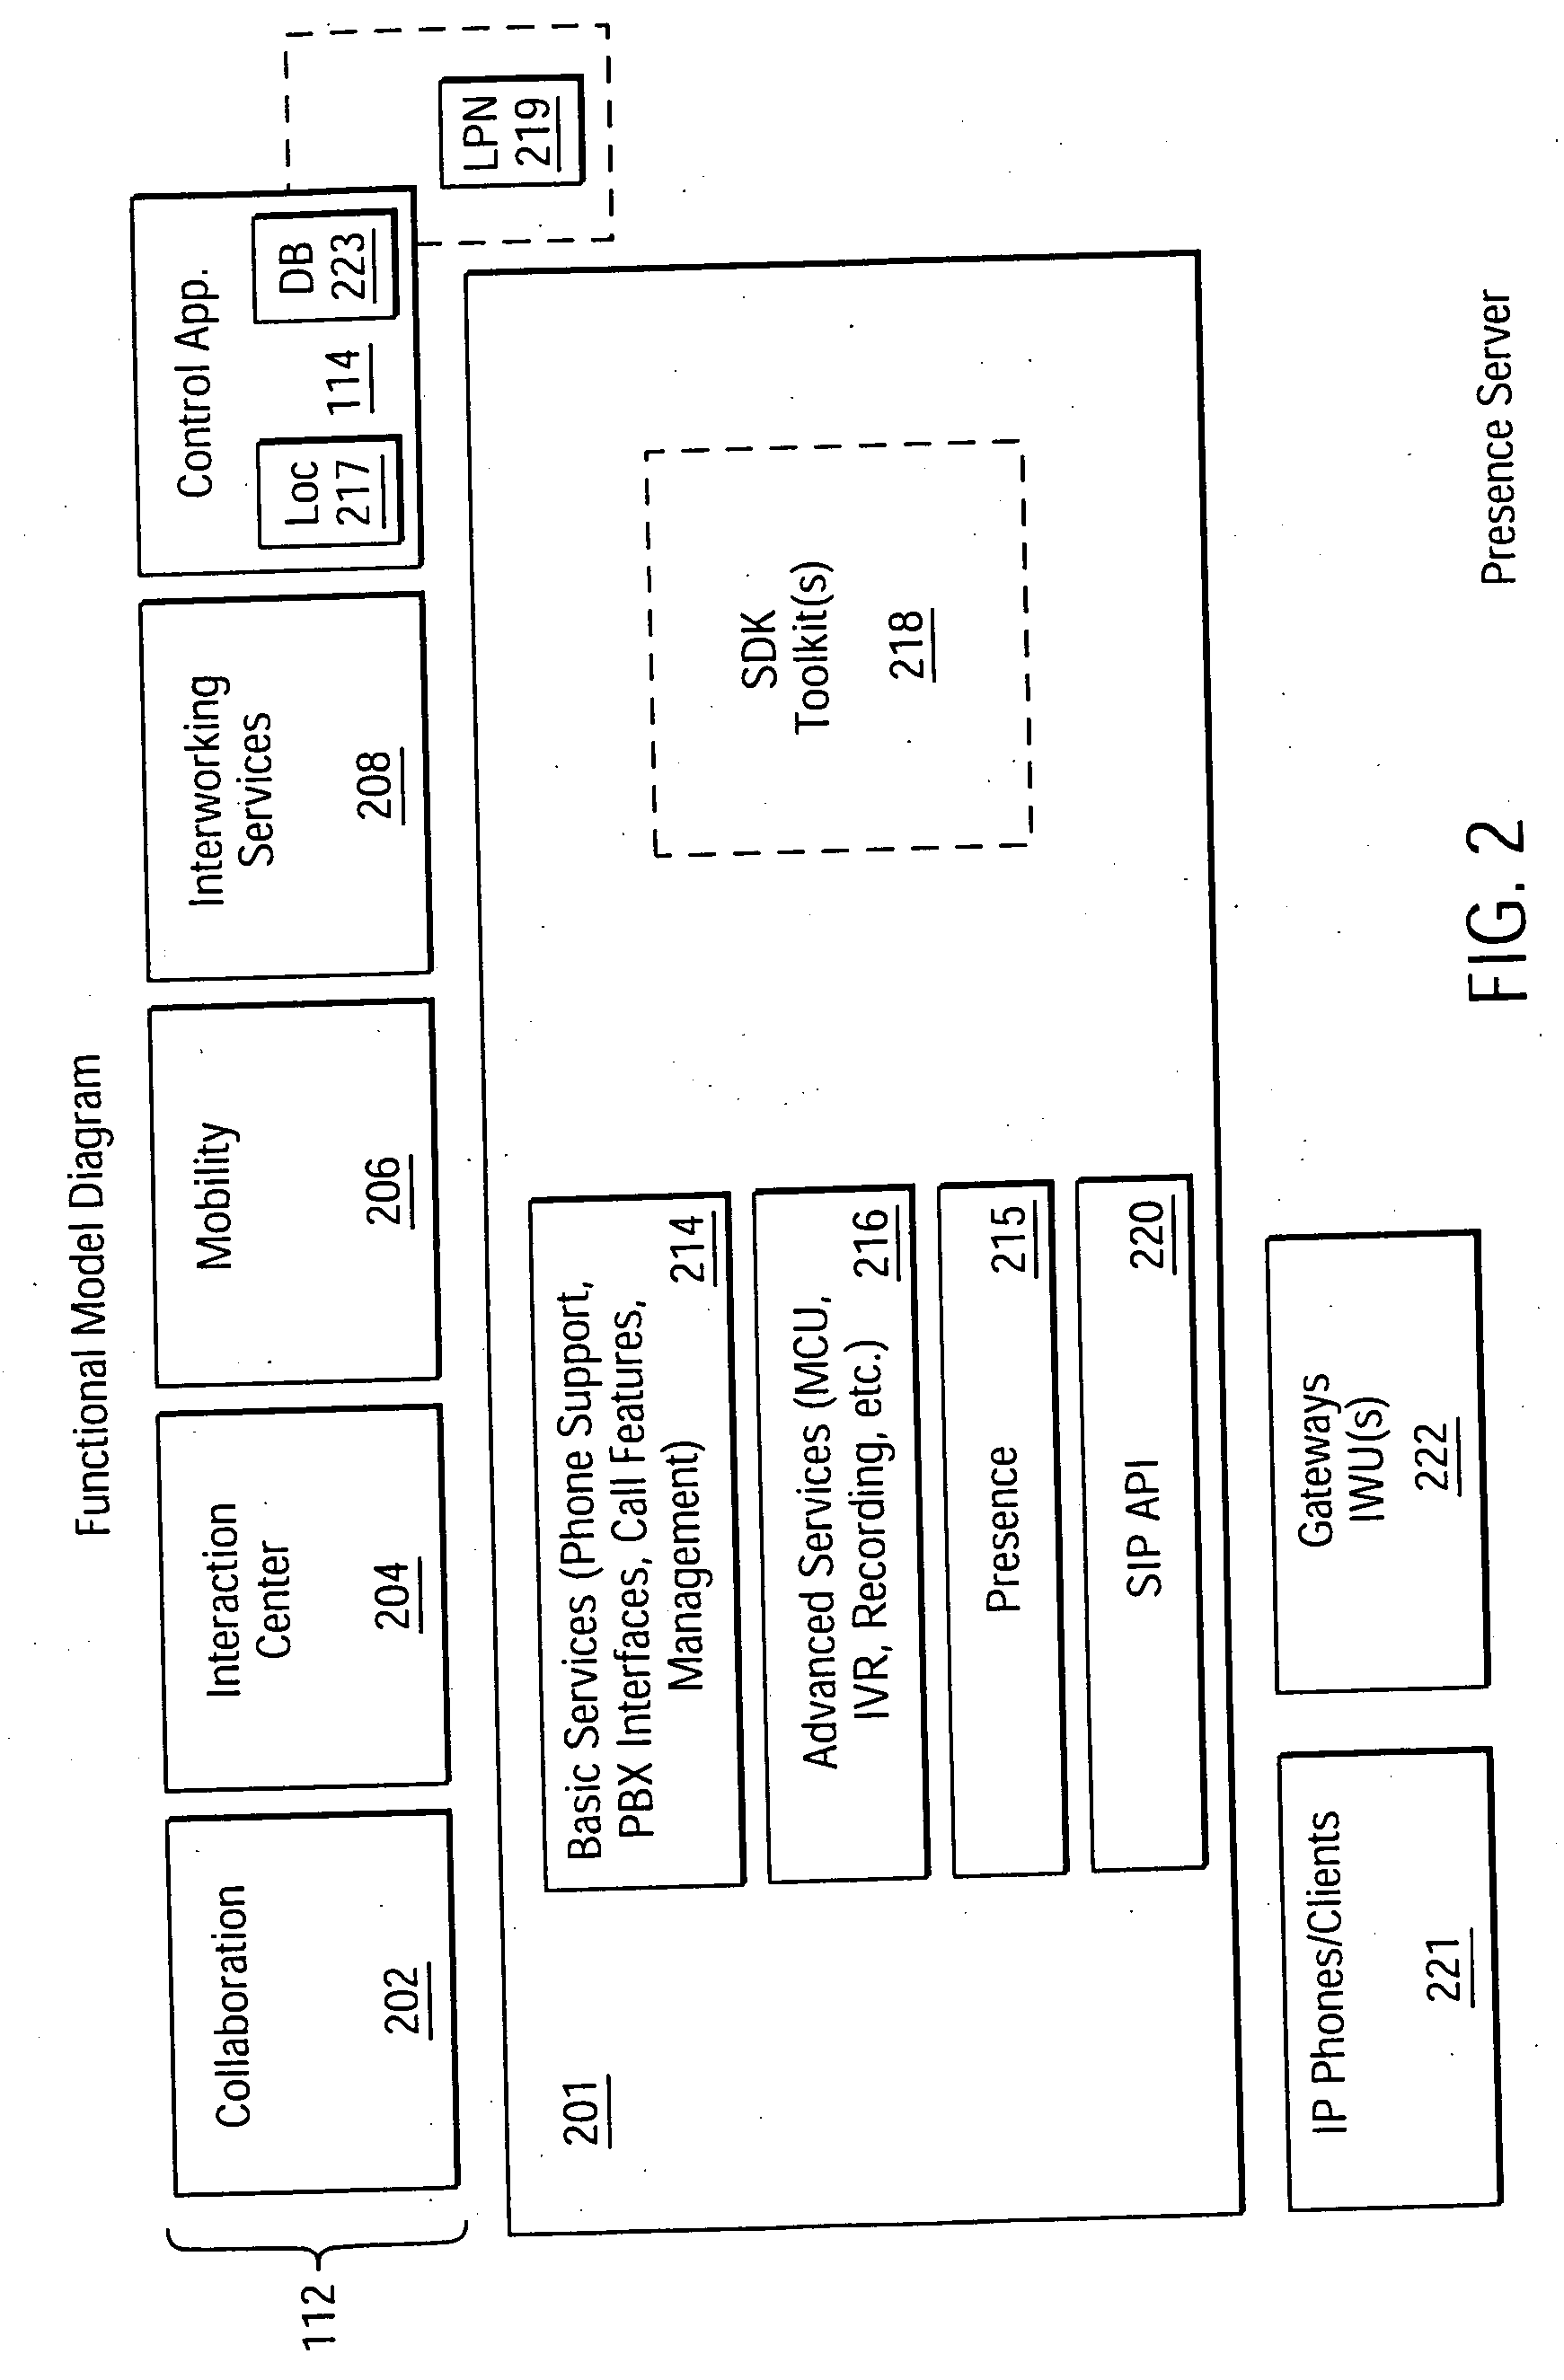 System and method for web-based presence perimeter rule monitoring